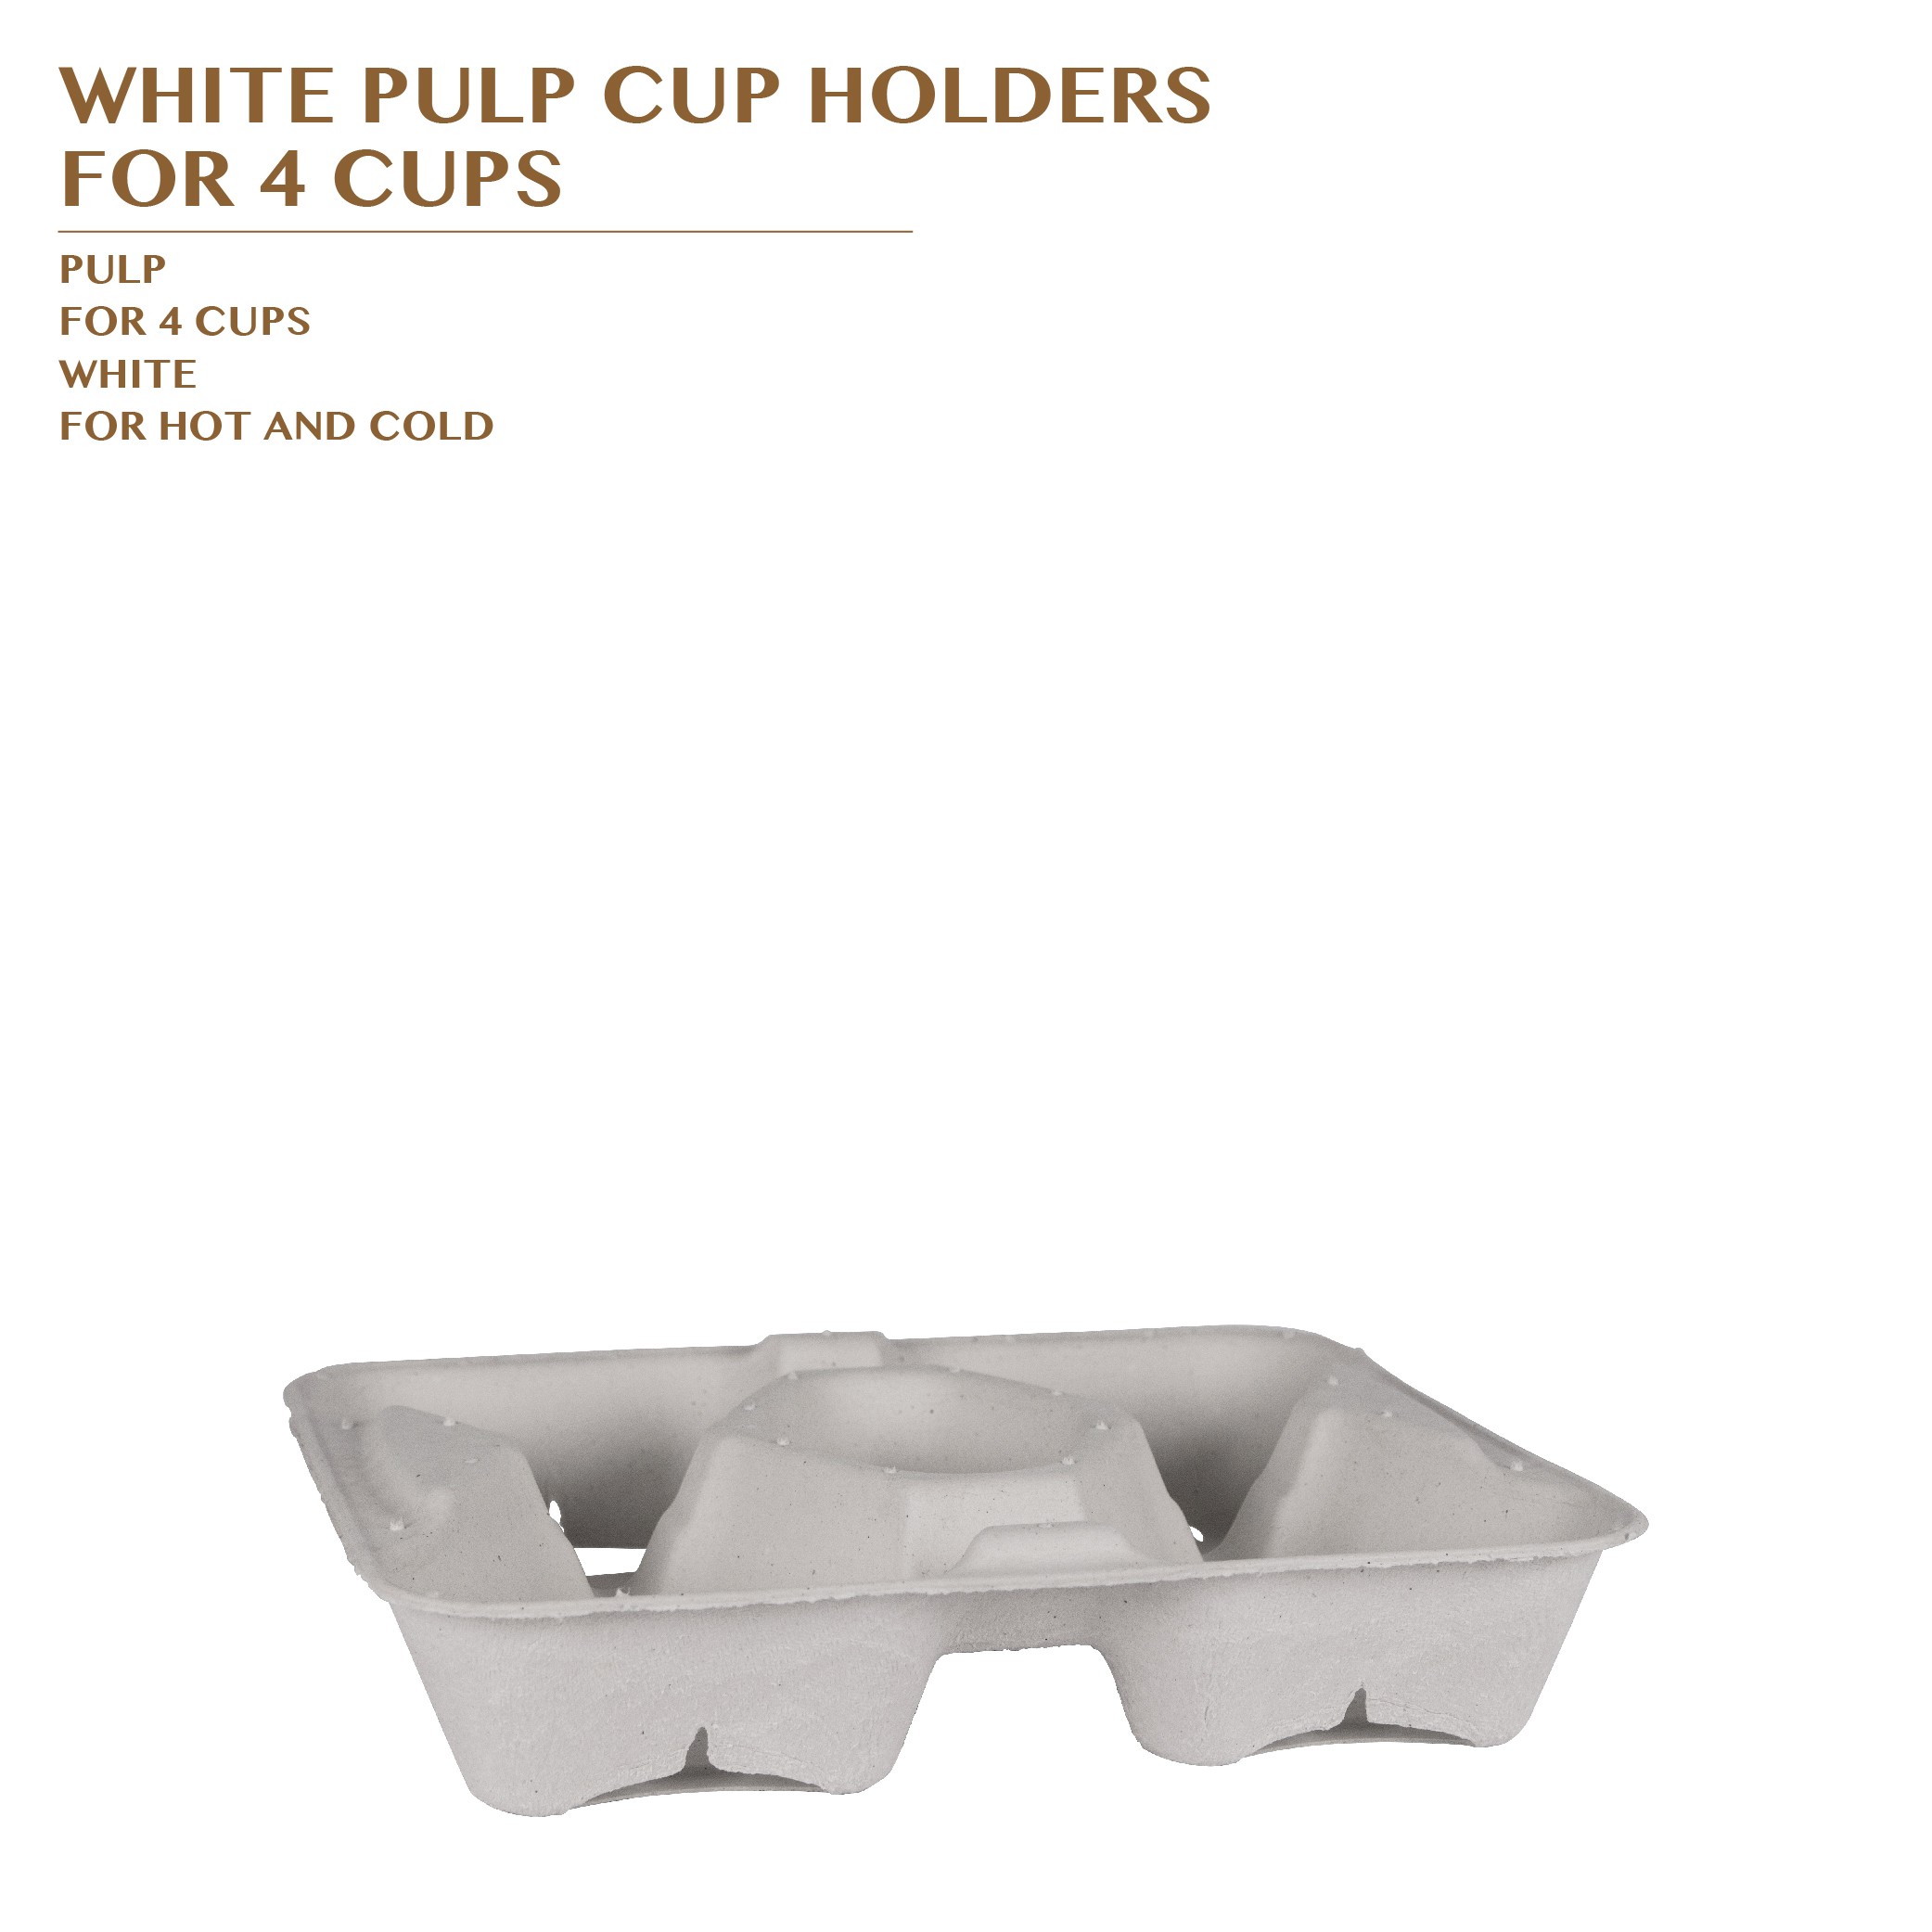 PRE-ORDER WHITE PULP CUP HOLDERS  FOR 4 CUPS